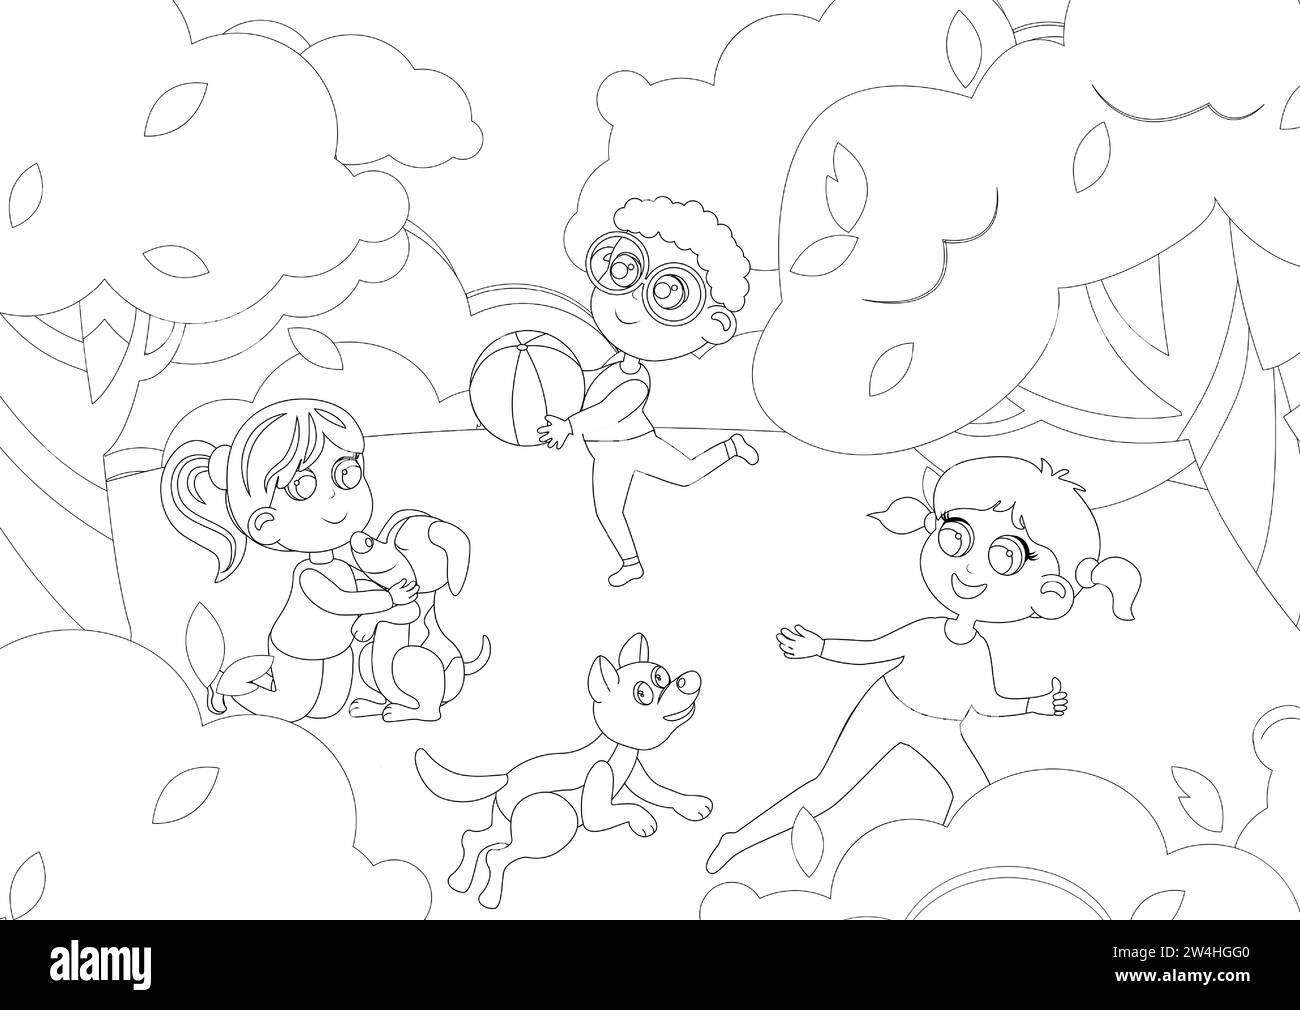 Coloring page. Group of children playing with pets and ball in nature. Beautiful summer or spring day in nature. Stock Vector